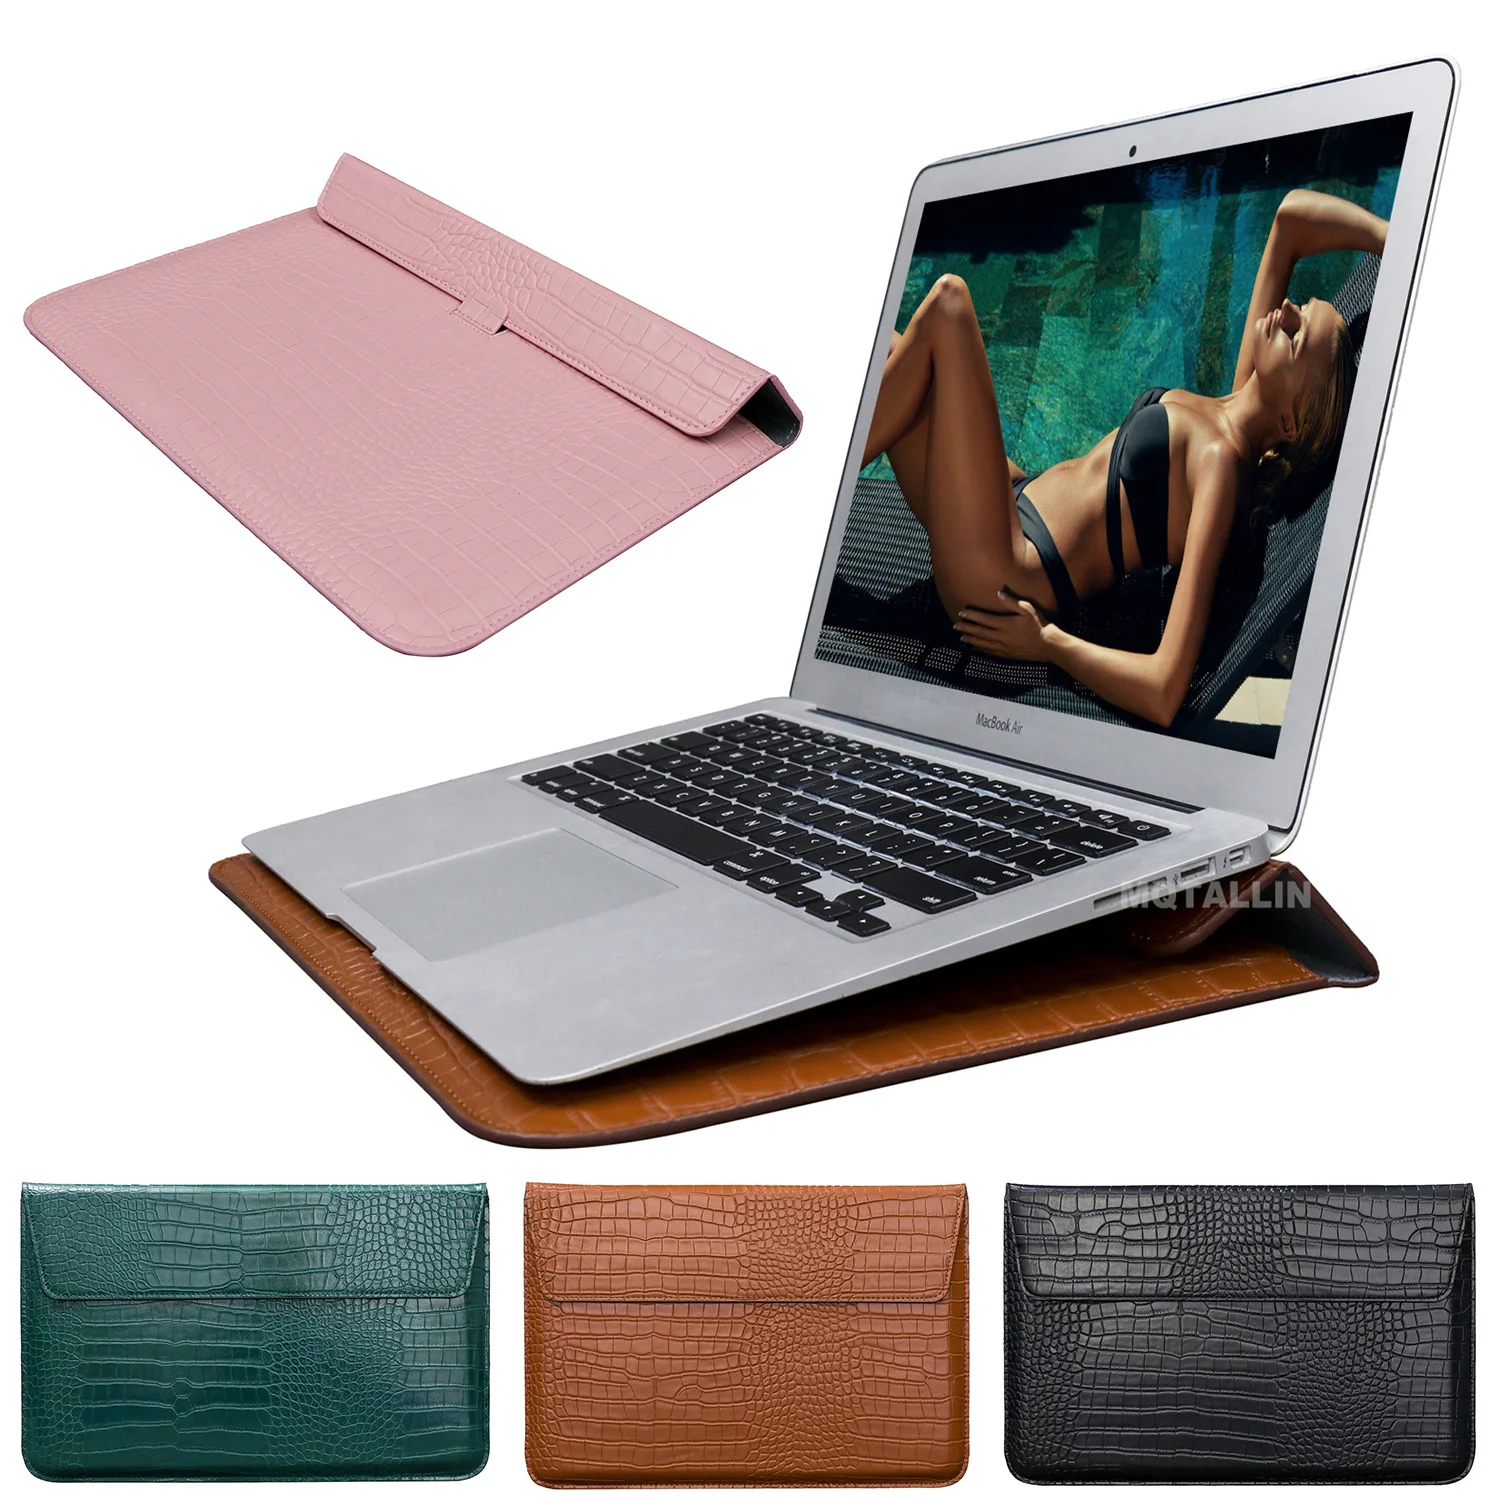 

New Mail sack Leather Bag Cover,For macbook Pro Retina Air 11 12 13.3 15 16,laptop Case For Mac m1 chip Air/pro 13 A2337 A2338